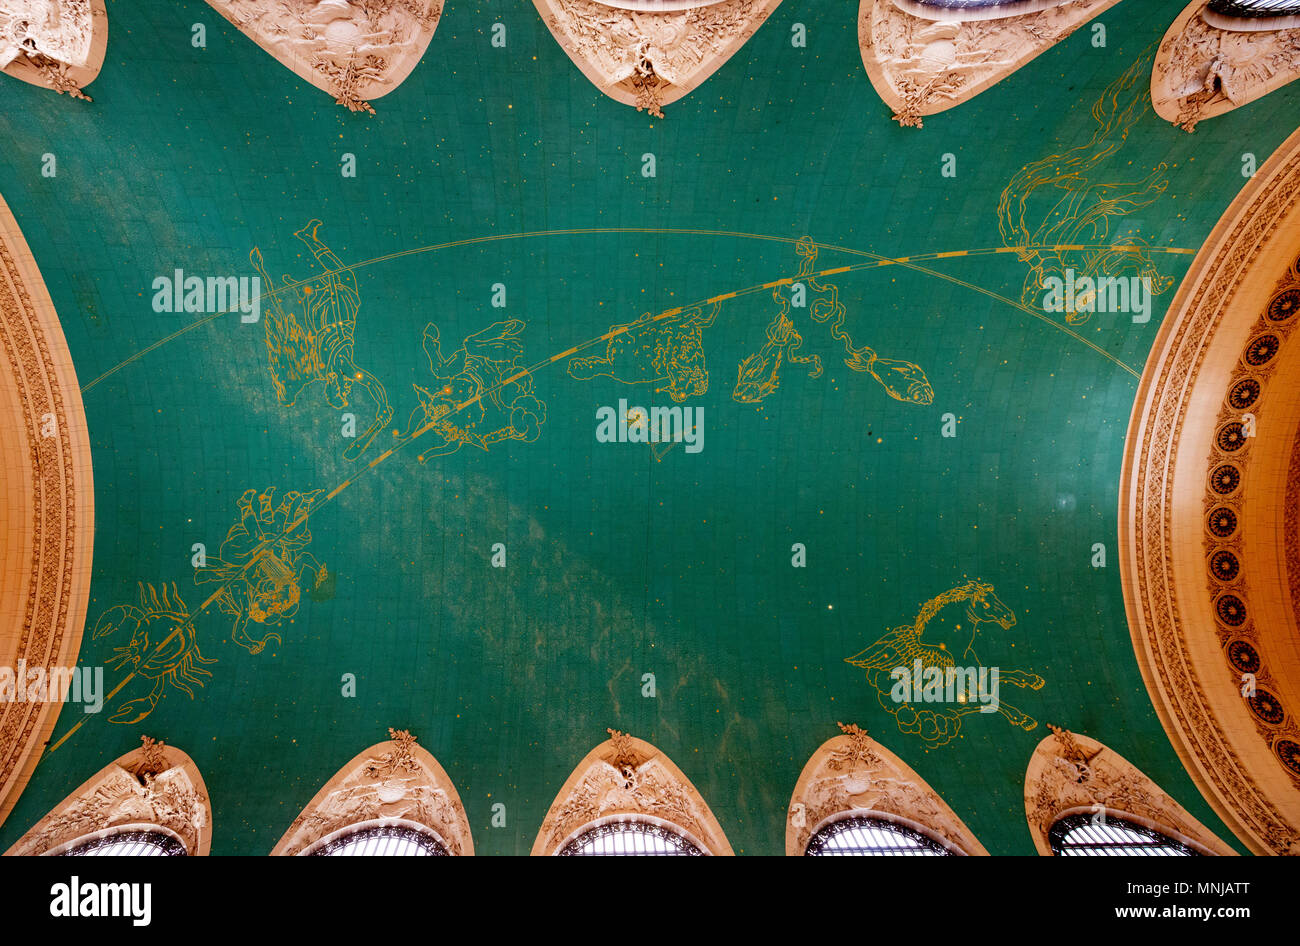 The starry constellation ceiling, Grand central Station, New York city USA Stock Photo